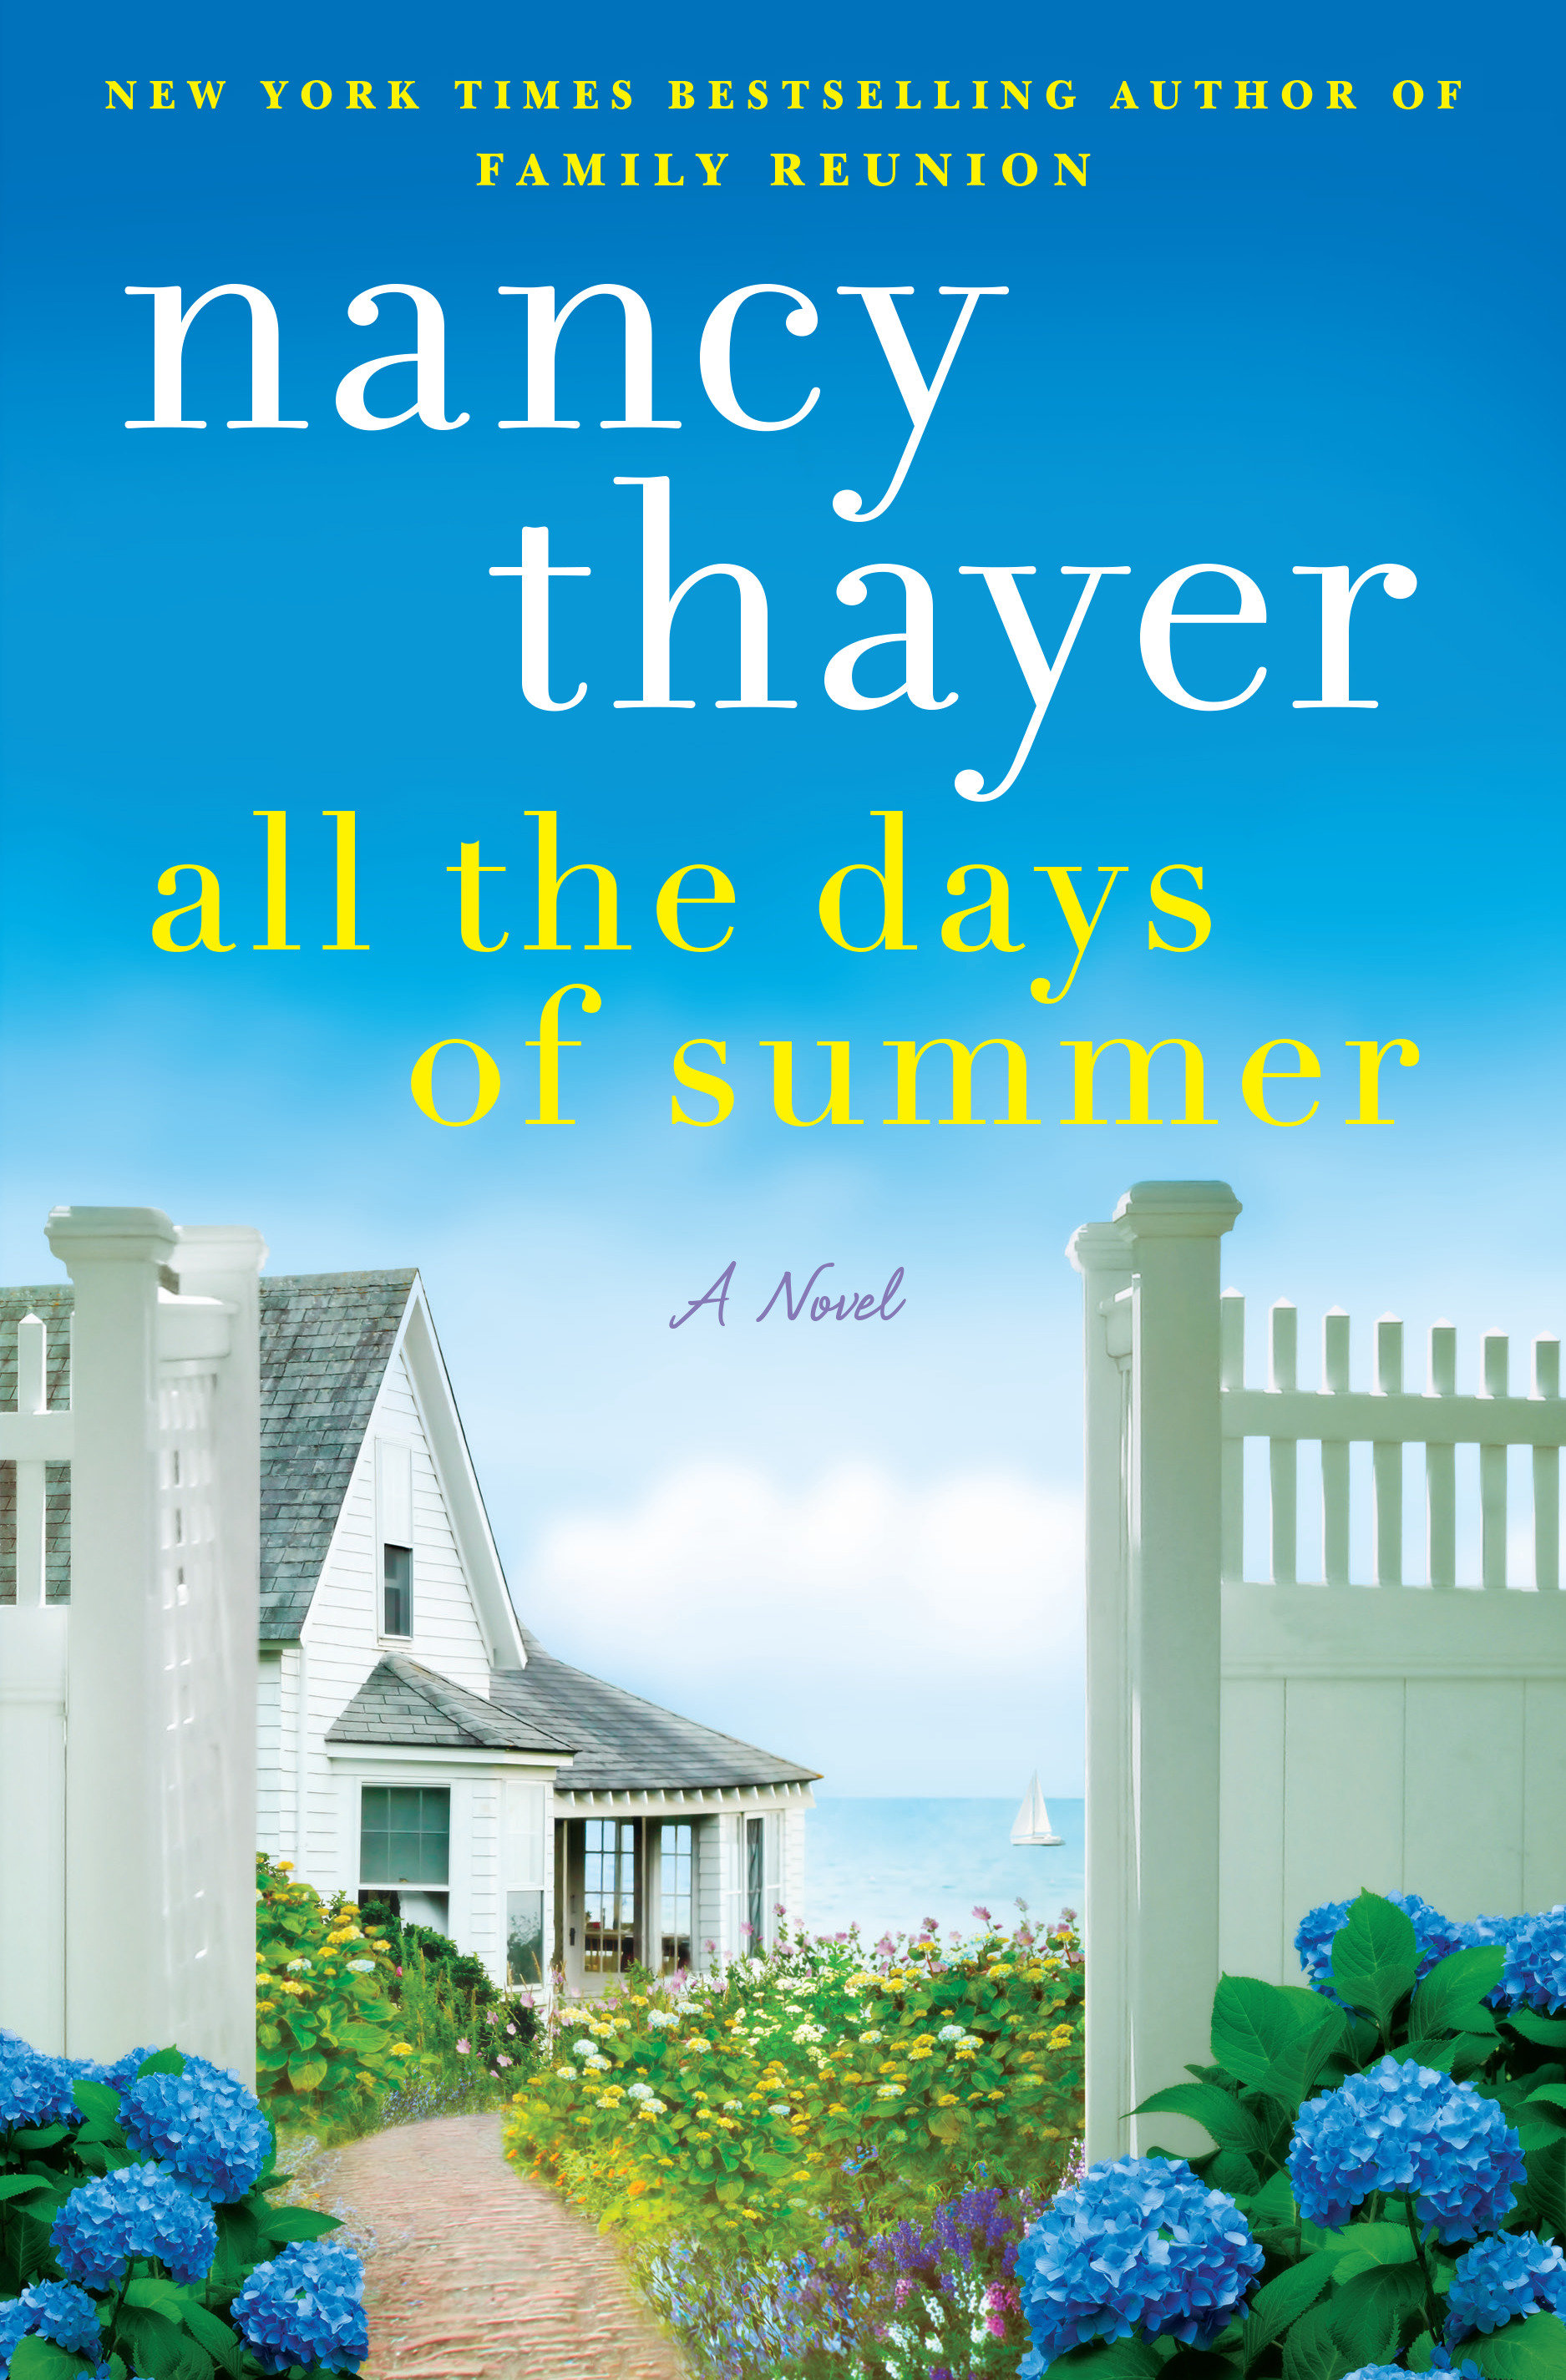 All The Days Of Summer (Hardcover Book)